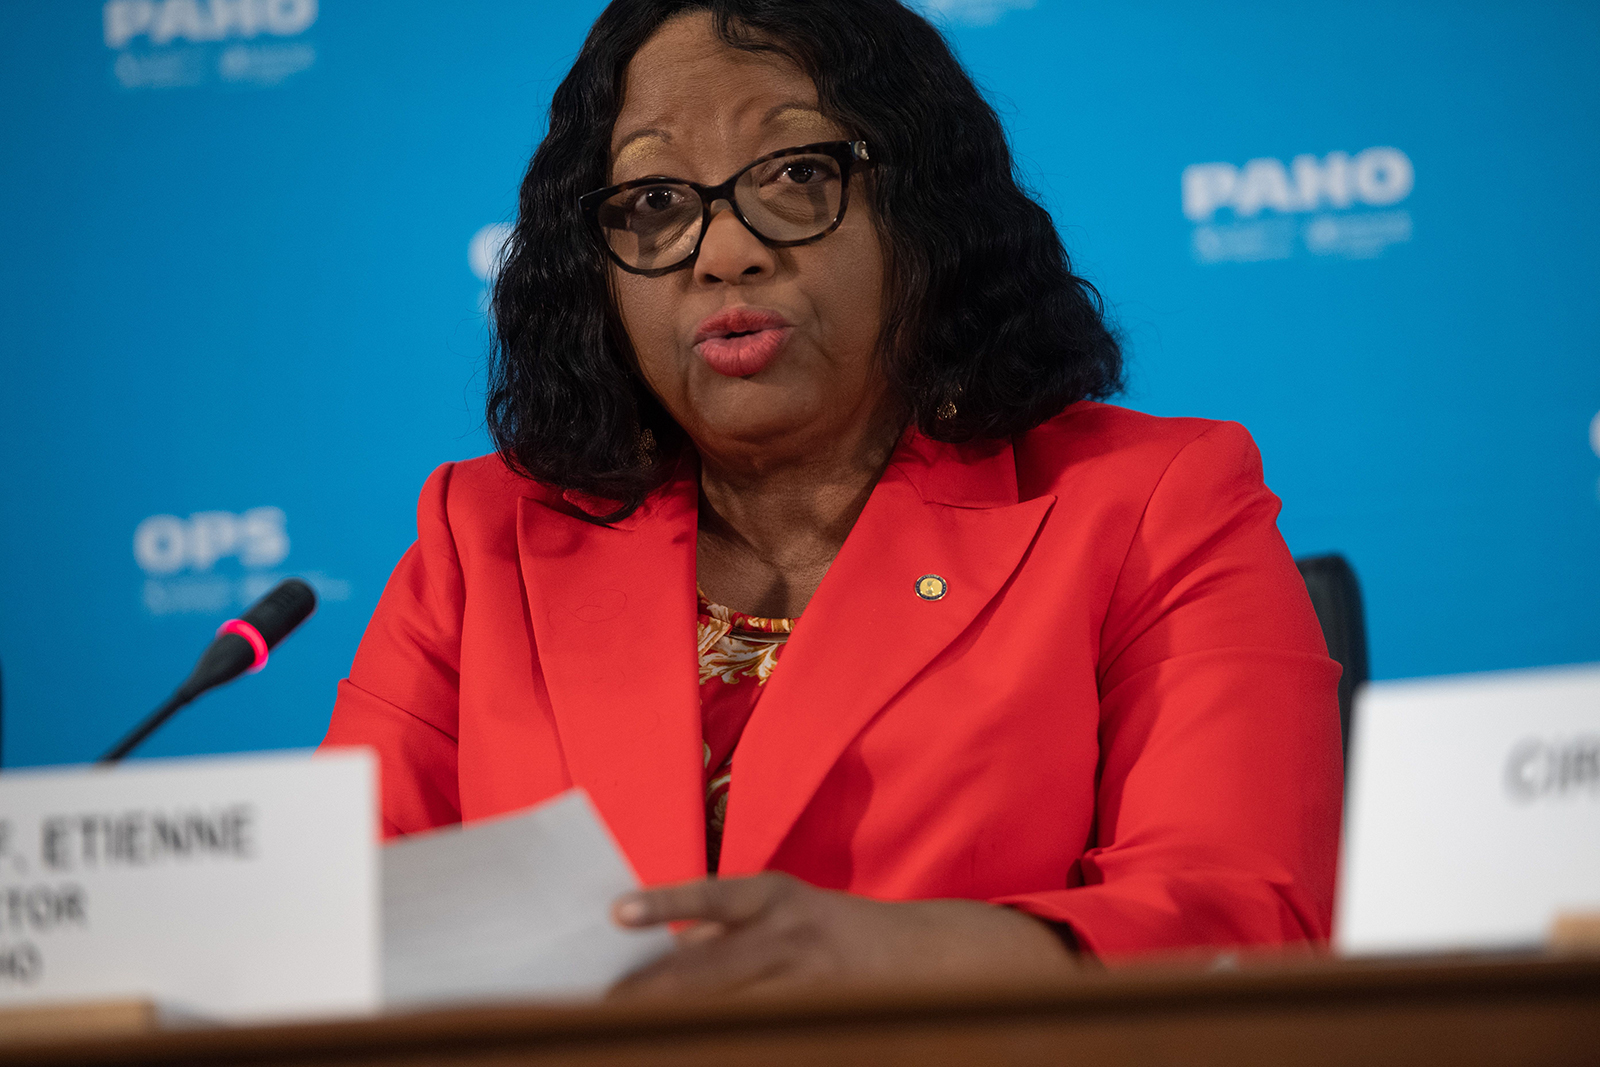 Dr. Carissa Etienne, Director of the Pan American Health Organization (PAHO) and World Health Organization (WHO) Regional Director for the Americas, speaks during a press briefing at PAHO Headquarters in Washington, DC, on March 6.